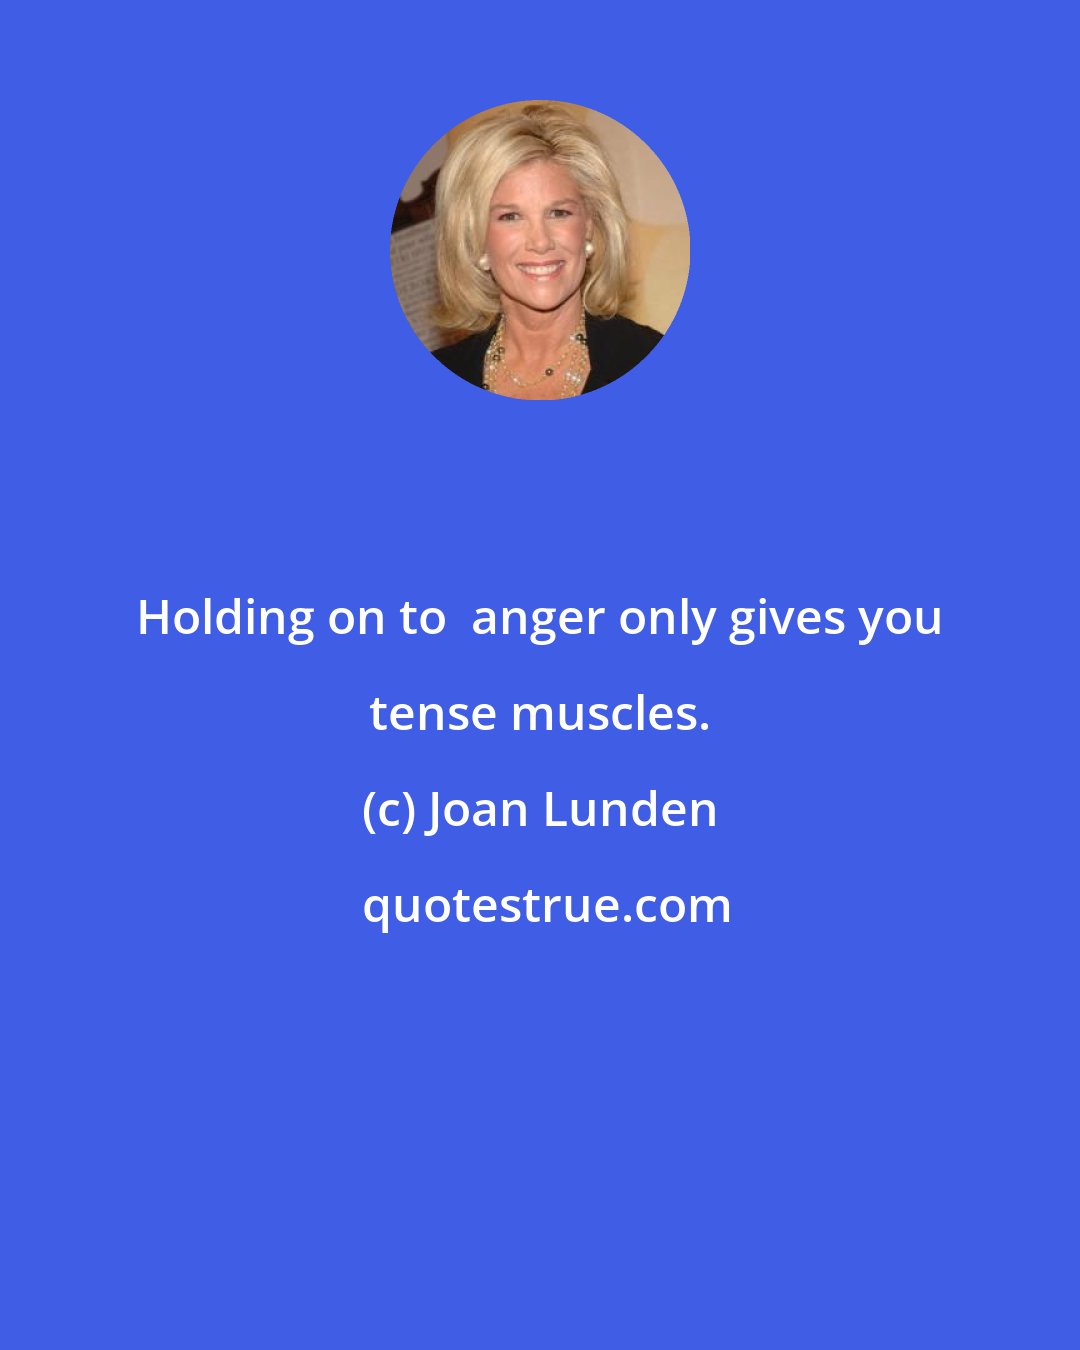 Joan Lunden: Holding on to  anger only gives you tense muscles.